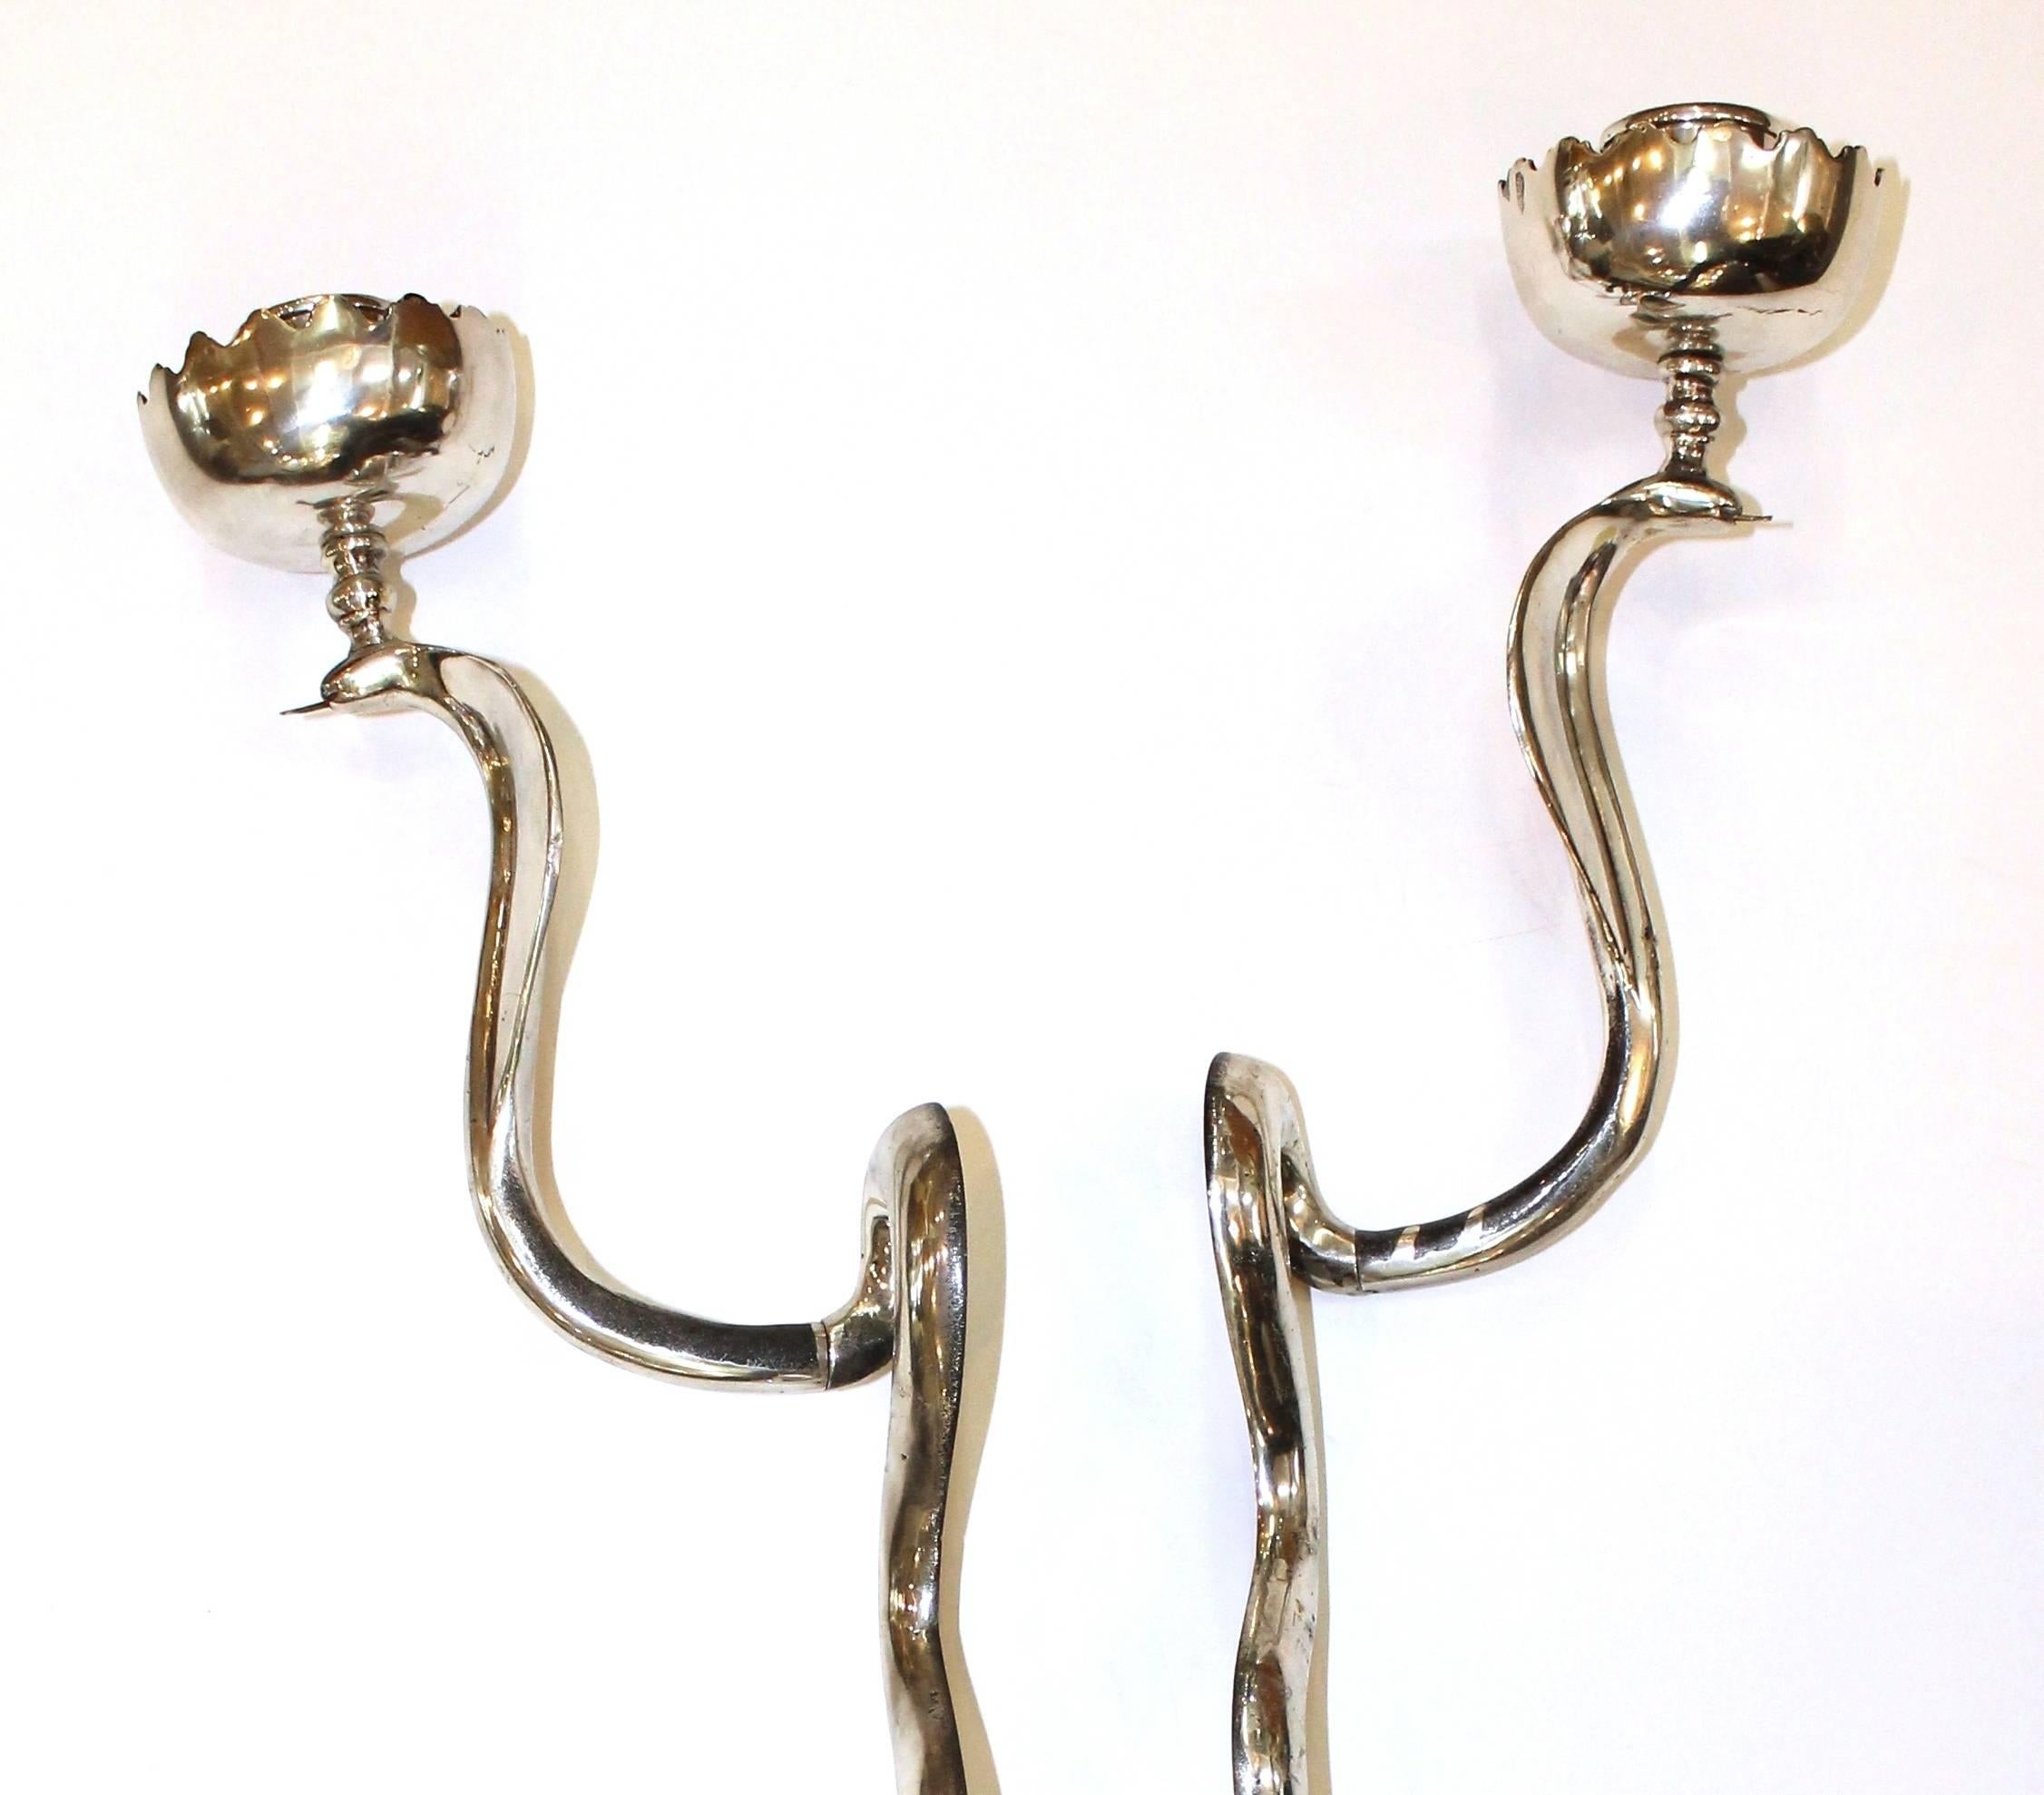 Pair of mid-20th century sculptural candle sconces as serpentine cobras, with metallic finish, each surmounted by lotus bobeche. Very good condition, wear to finish consistent with age and use.

110383